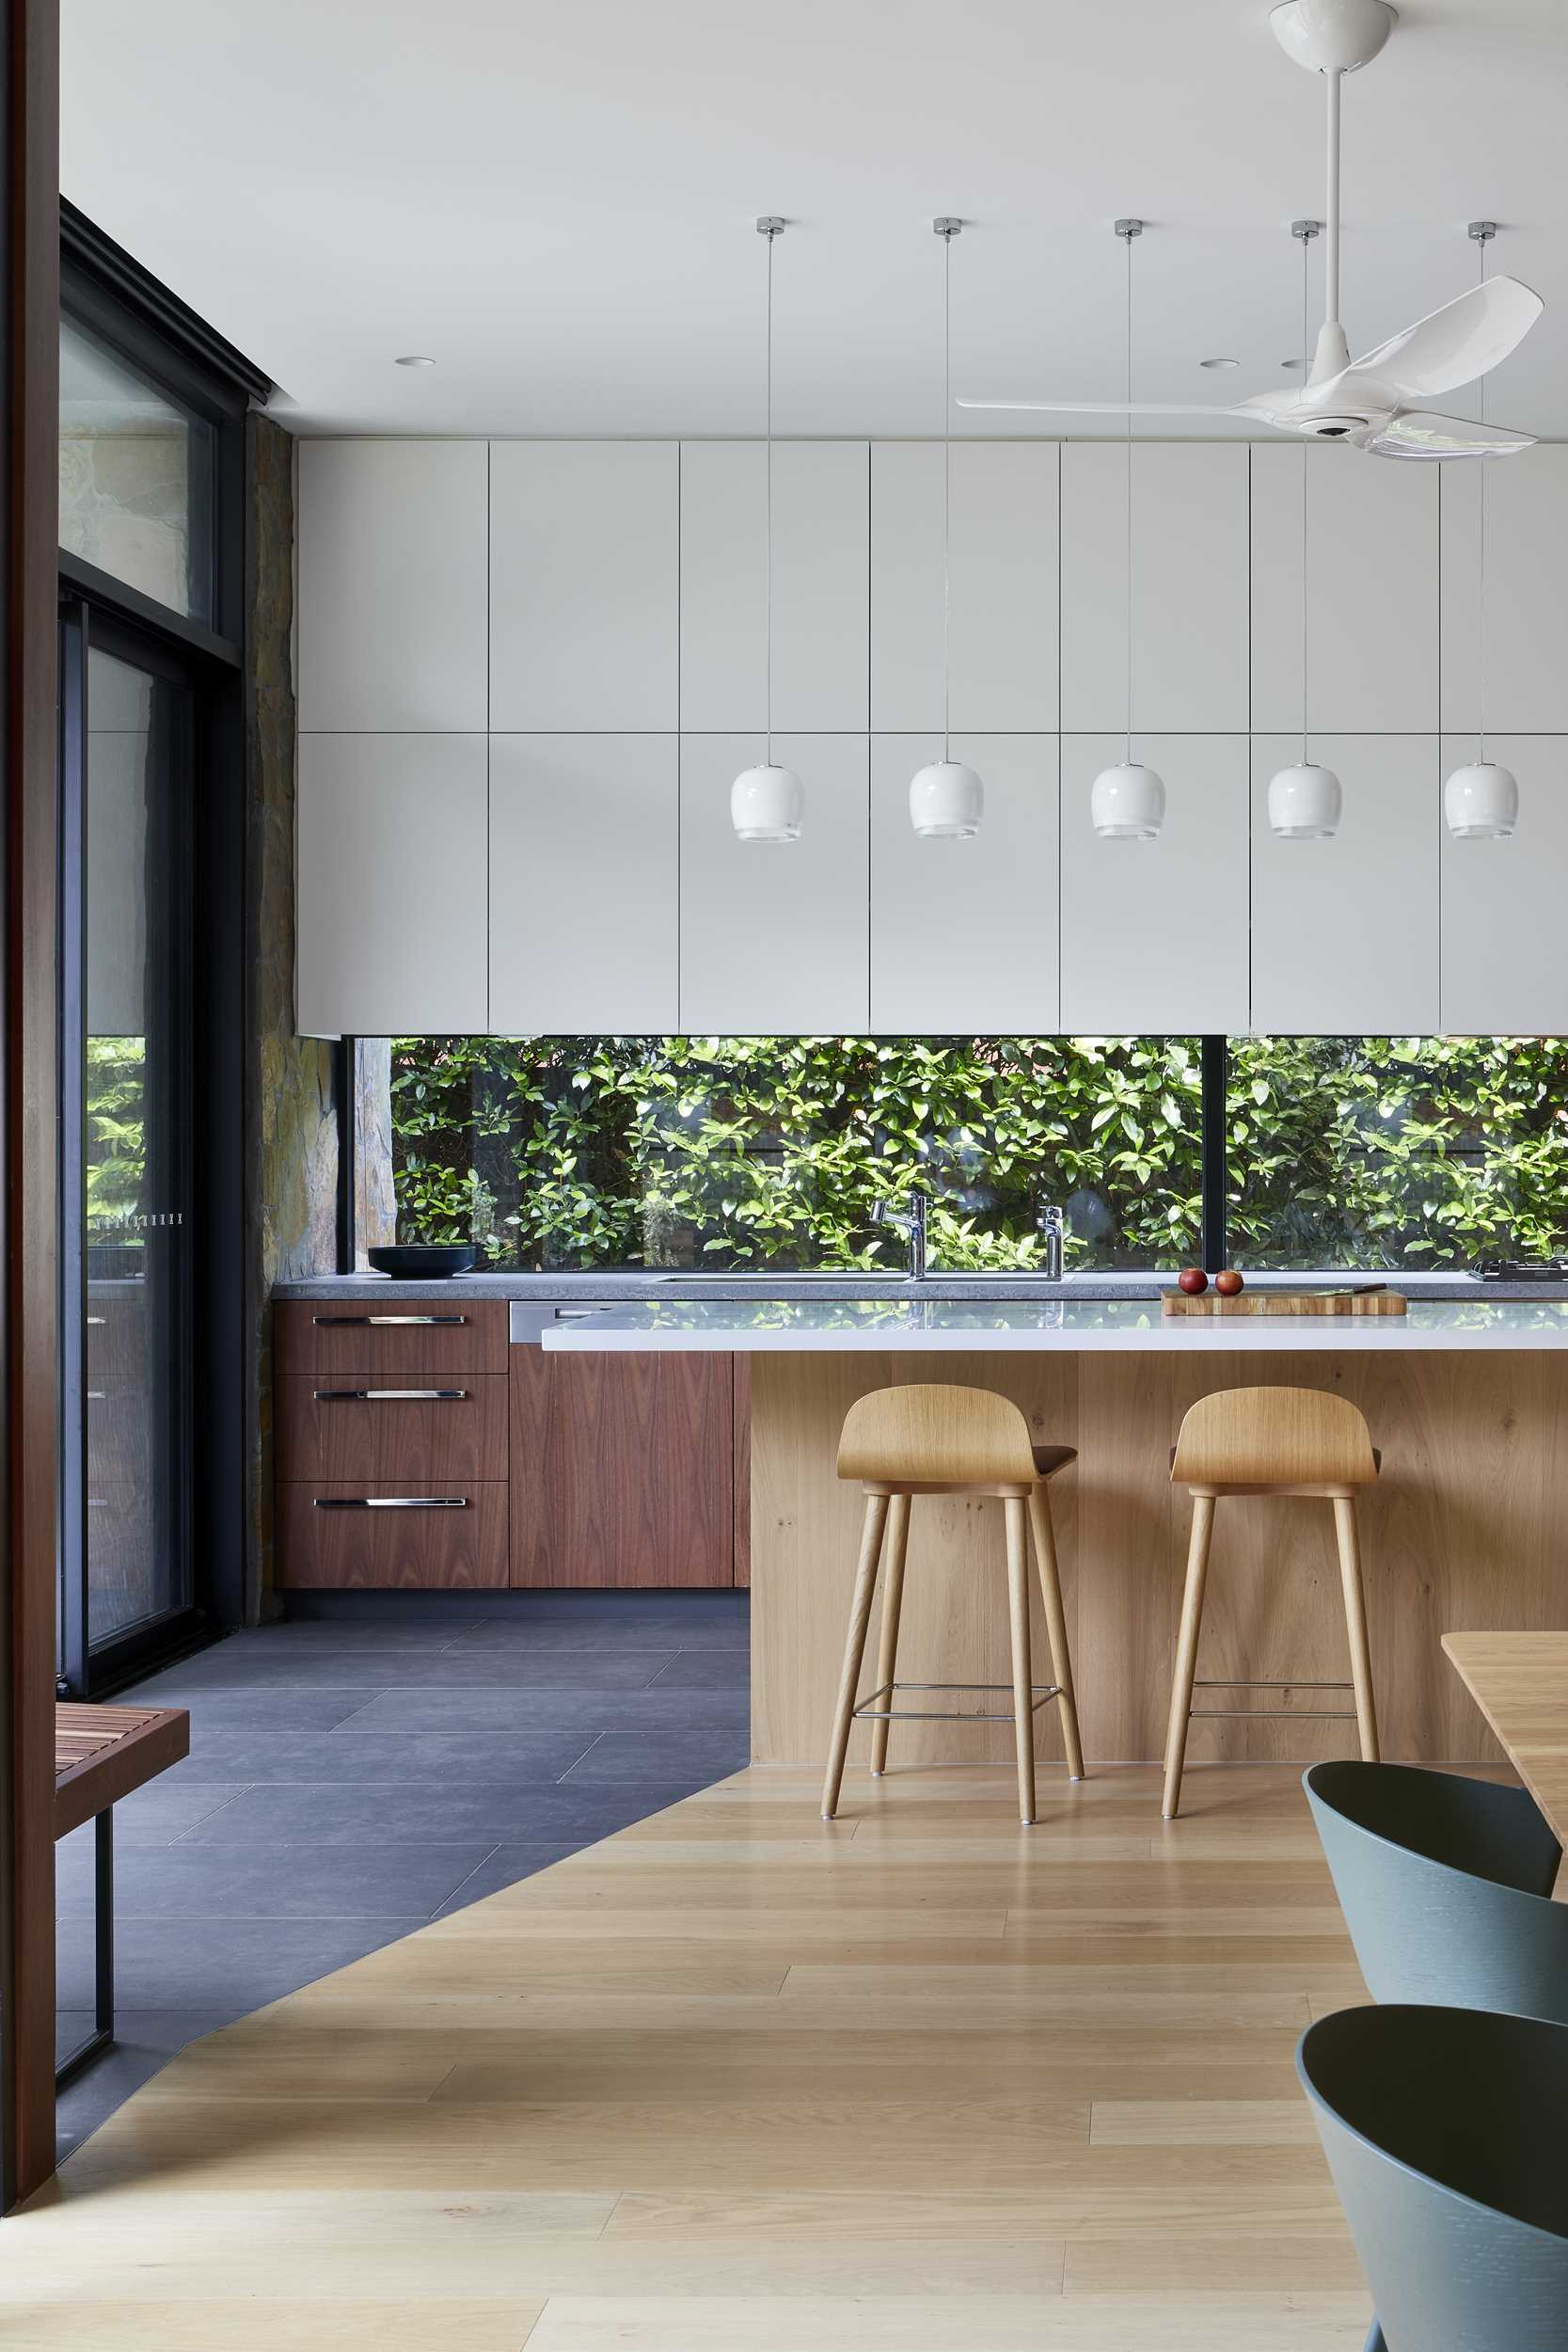 In this modern kitchen, dark wood cabinetry has been paired with minimalist white cabinets, while the island has room for a pair of stools and seven pendant lights to ensure the island is well-lit. The kitchen also includes a glass backsplash, allowing the plants outside to be seen.